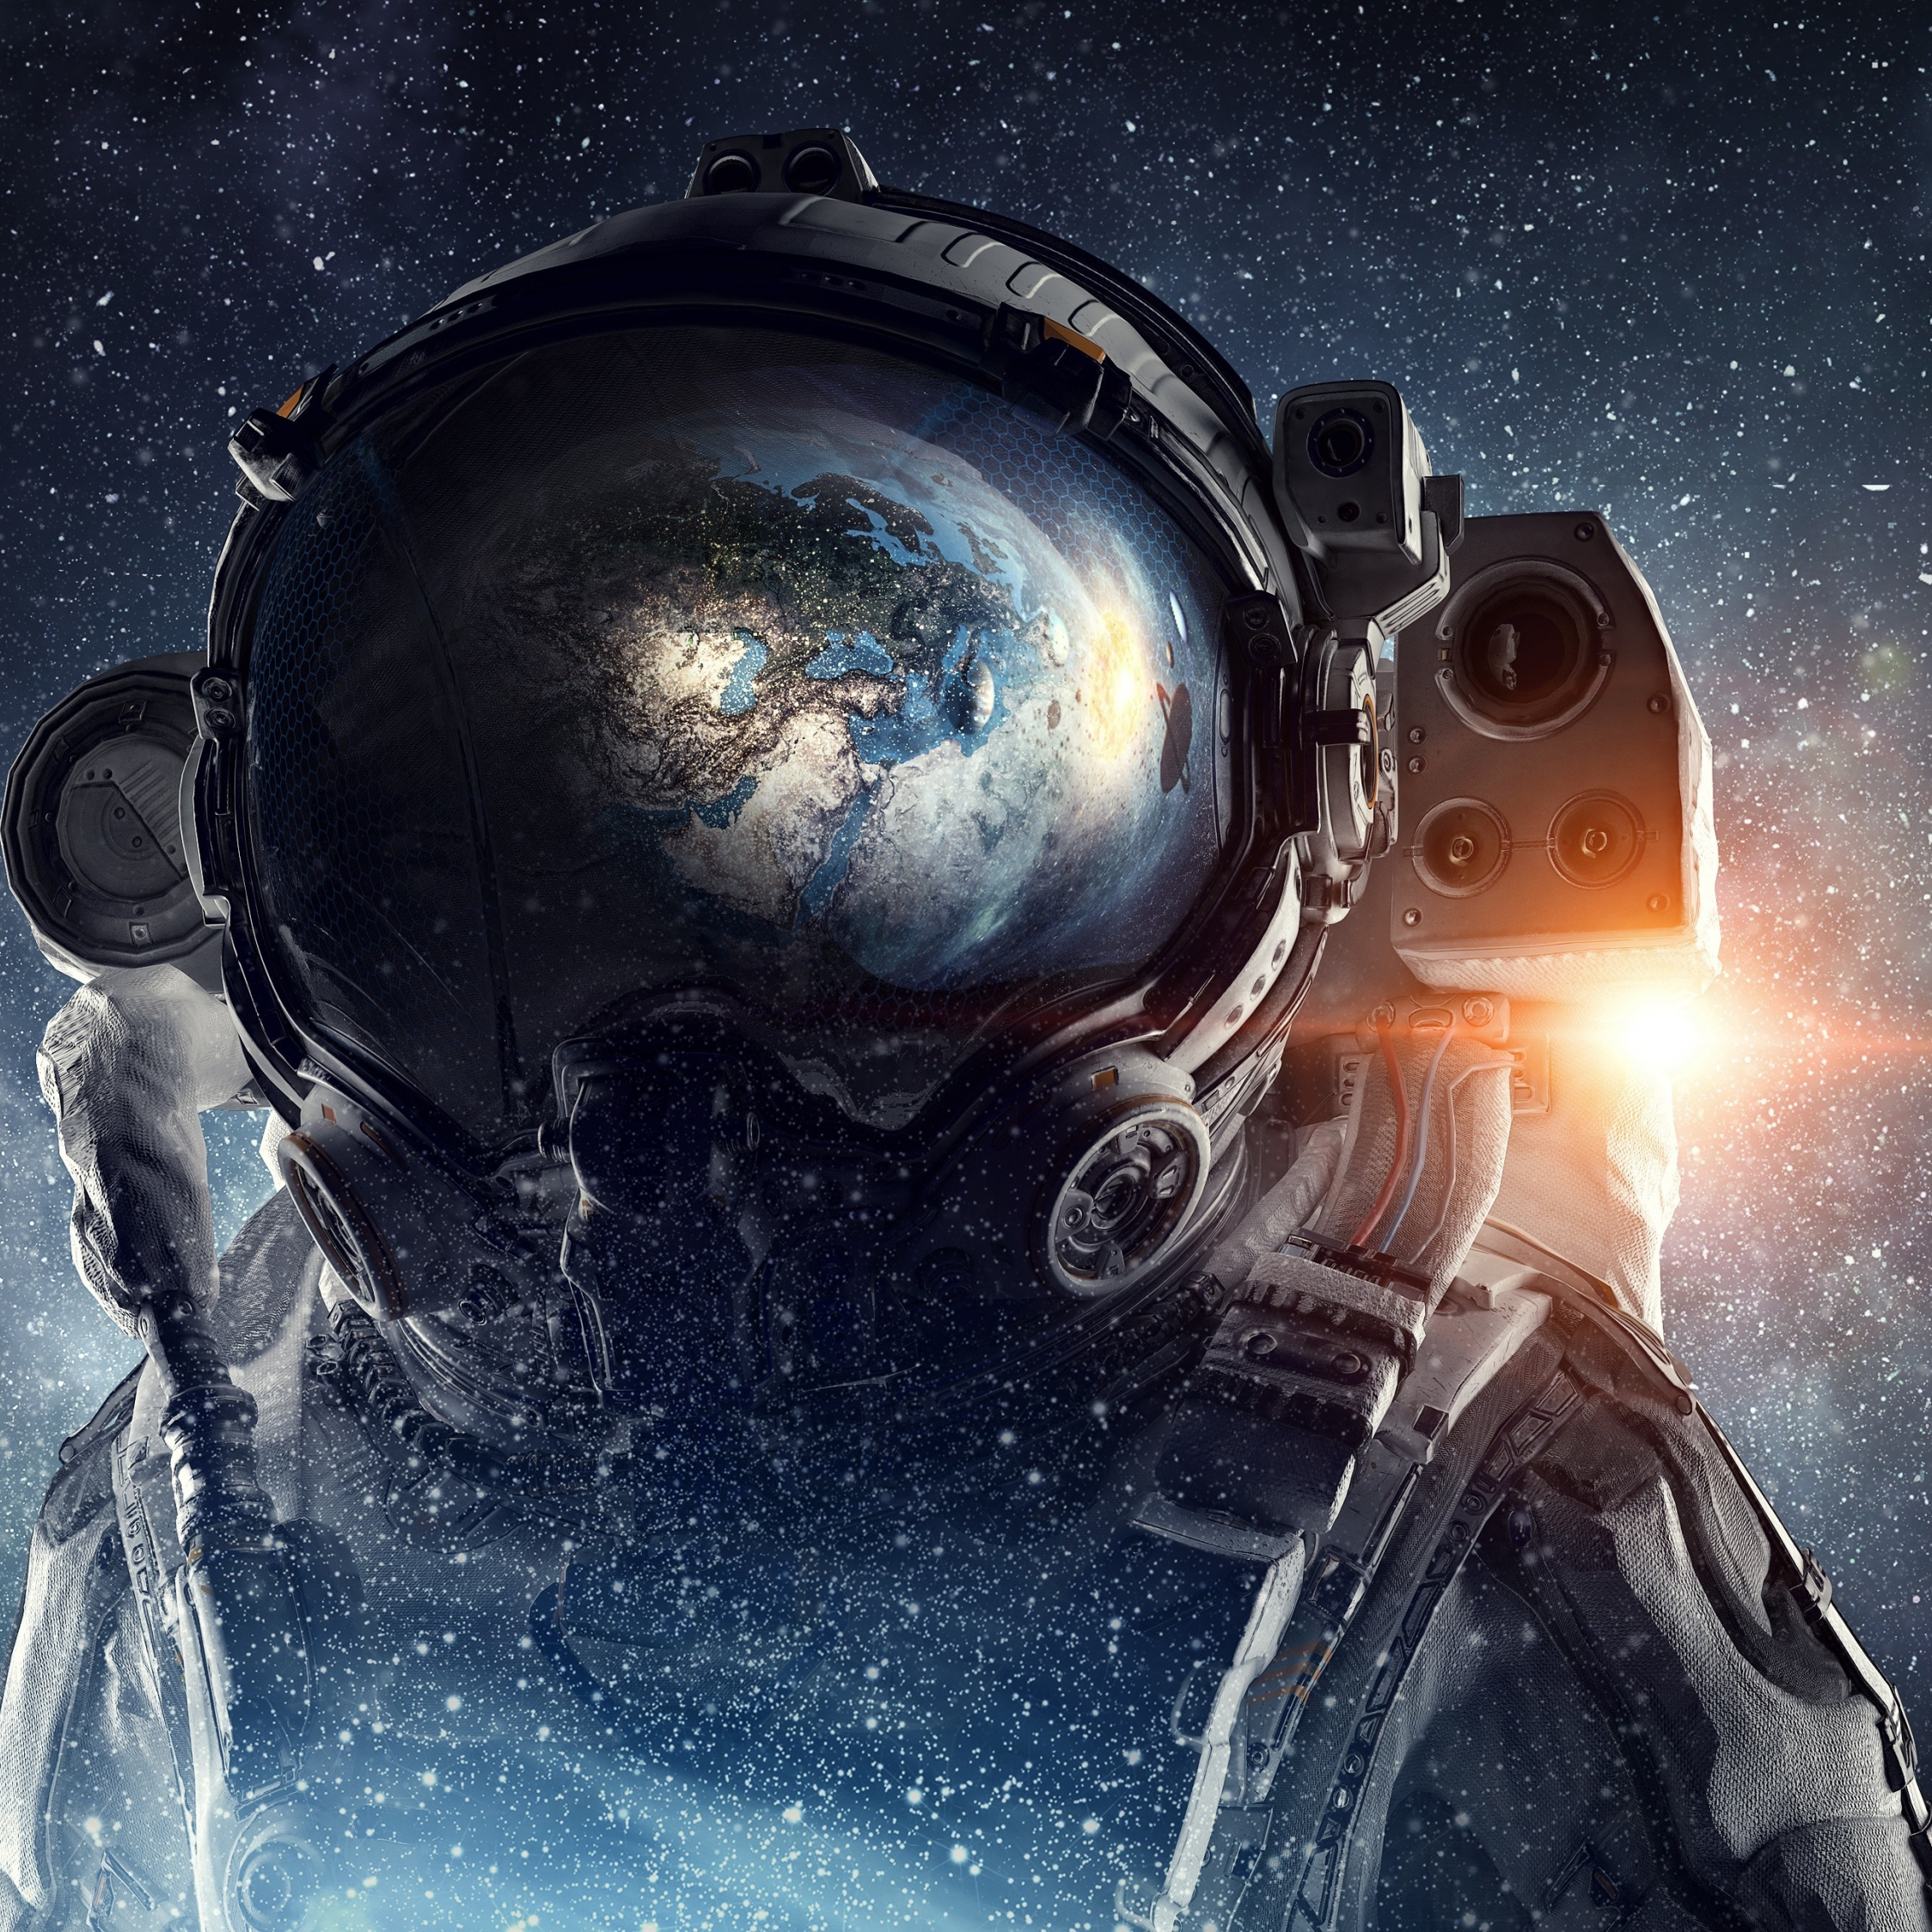 Download wallpaper 2248x2248 fantasy astronaut space ipad air ipad air  2 ipad 3 ipad 4 ipad mini 2 ipad mini 3 2248x2248 hd background 8388